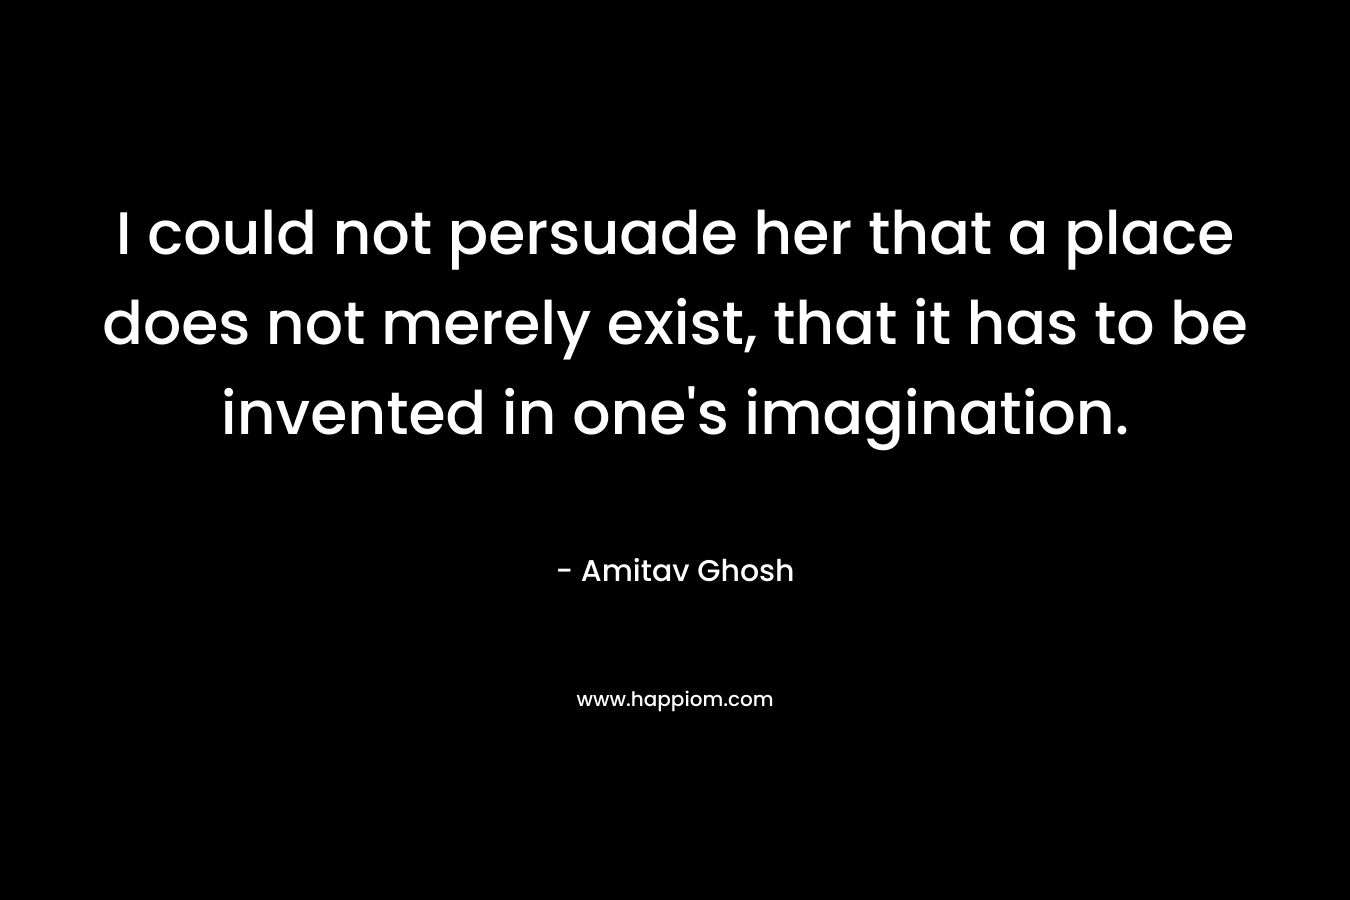 I could not persuade her that a place does not merely exist, that it has to be invented in one's imagination.